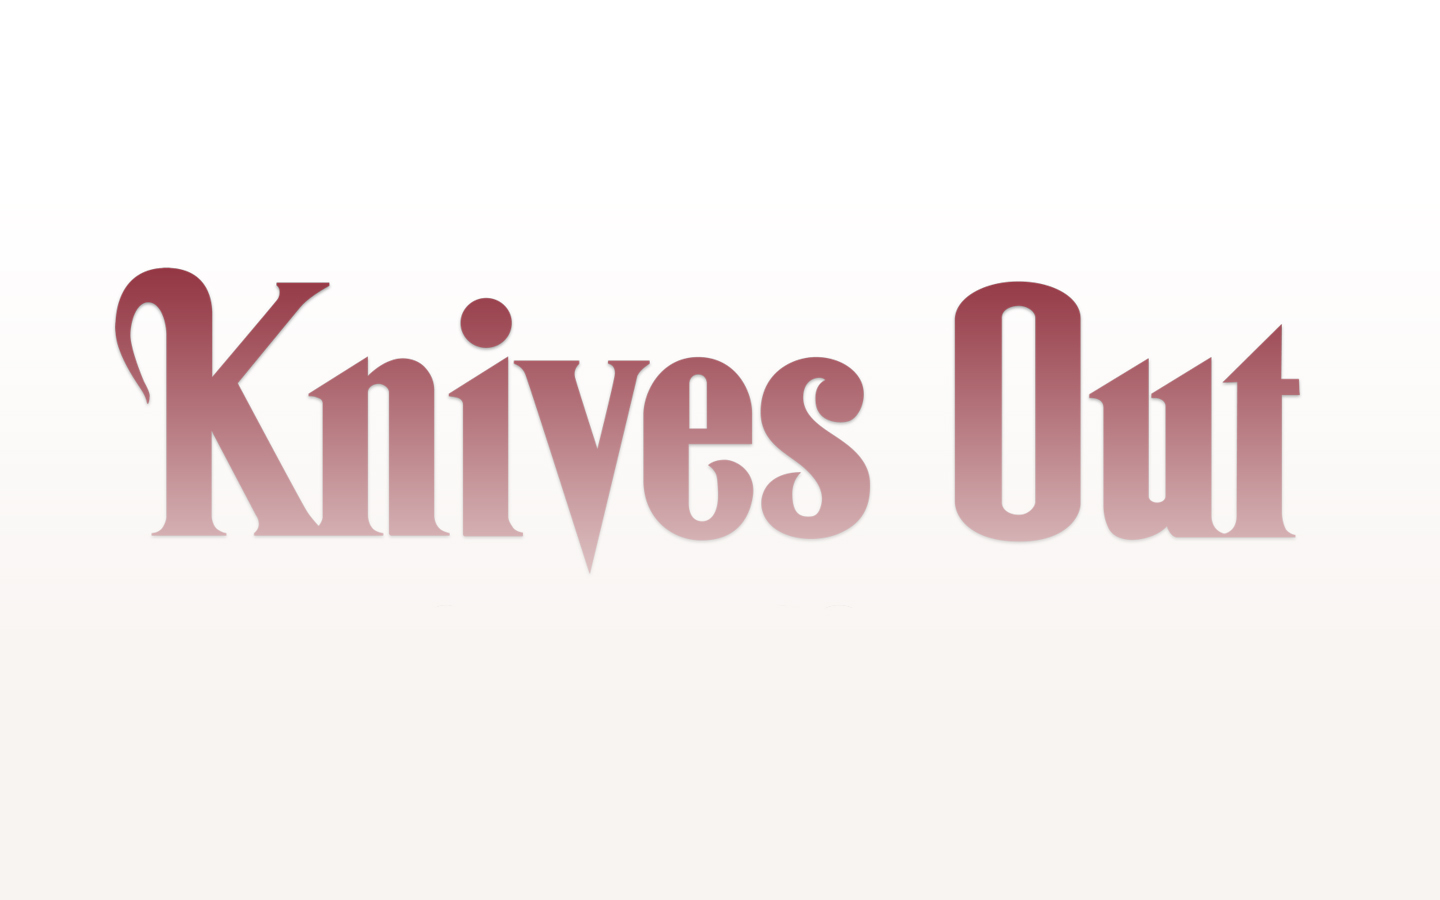 TIFF 2019: ‘Knives Out’ Is A Hilarious Whodunnit That Shines With Relevant Social Commentary – Review